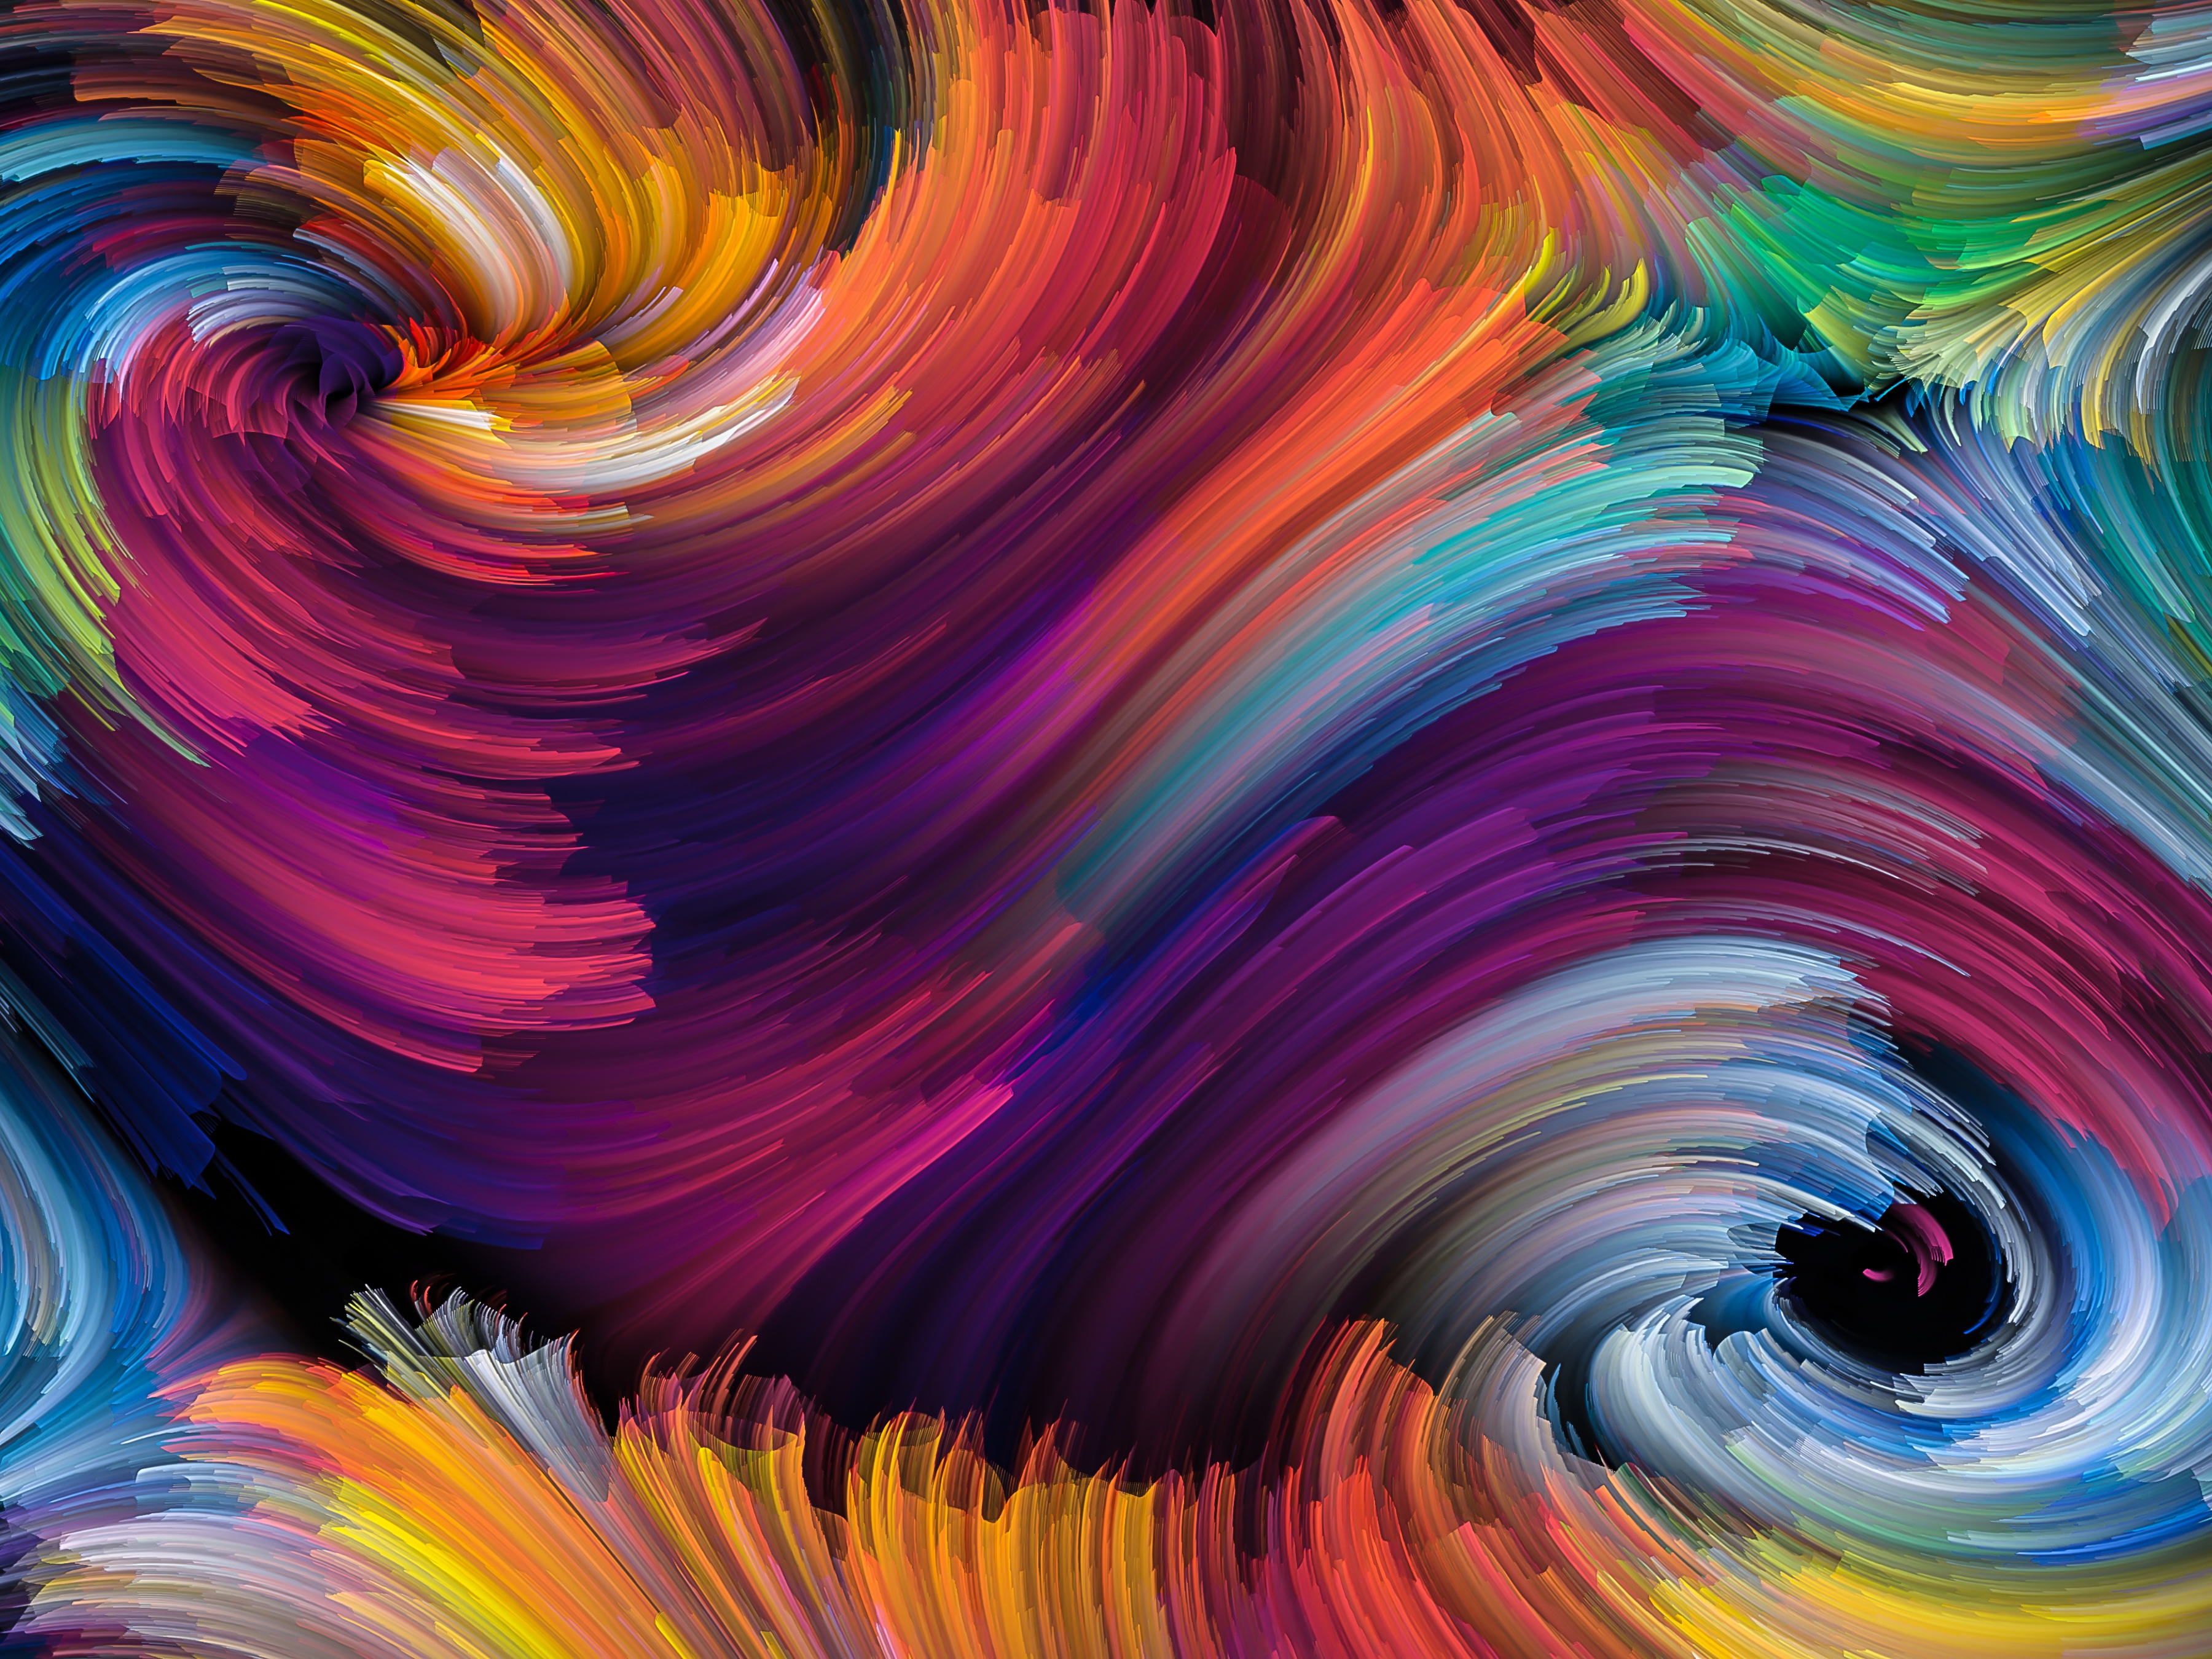 General 3600x2700 digital art abstract colorful